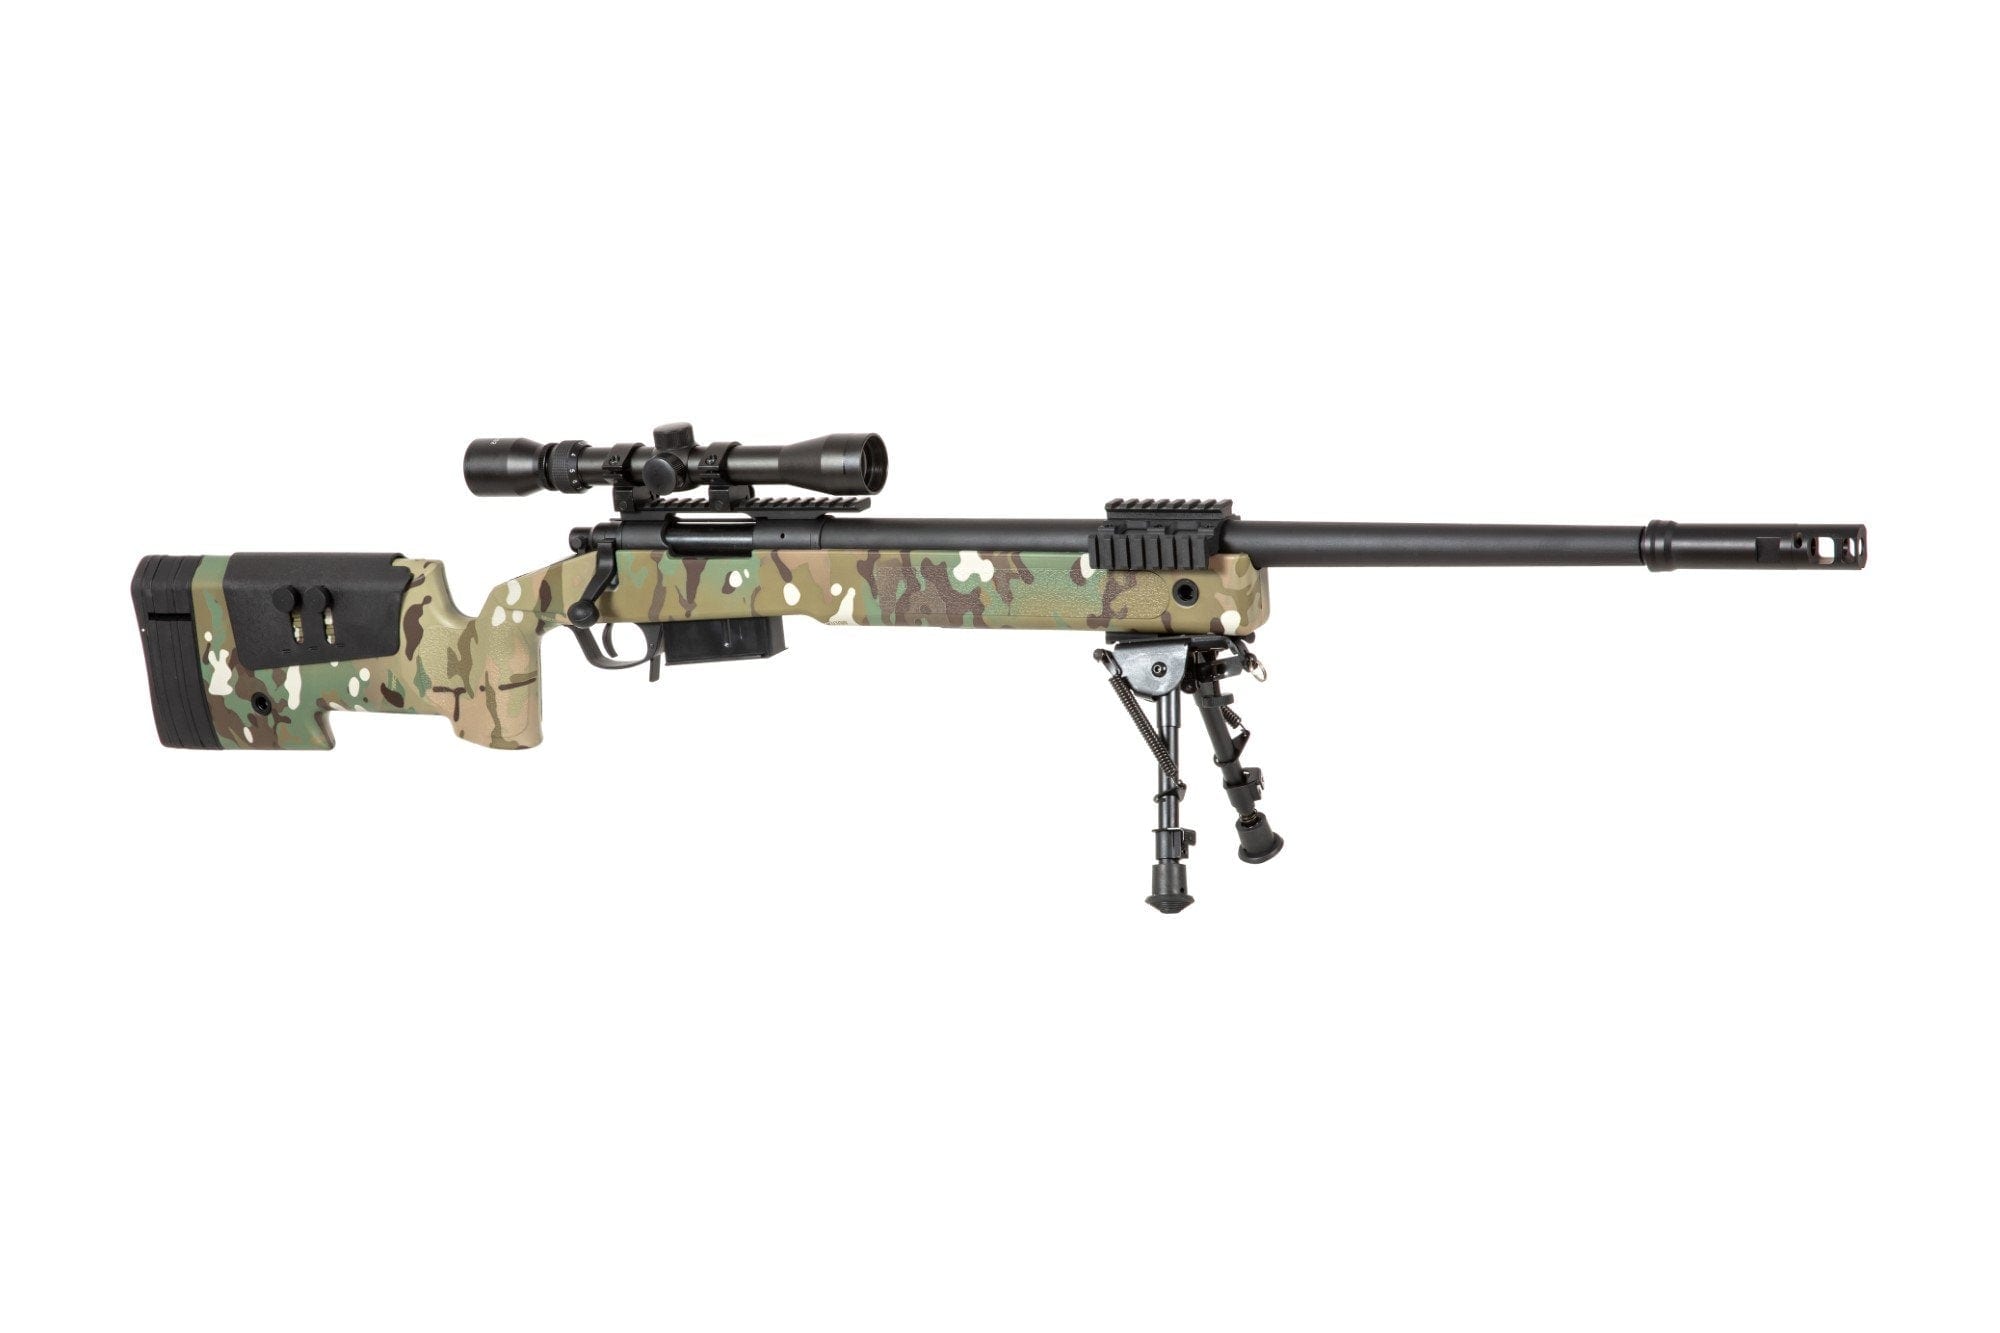 SA-CORE ™ S03 High Velocity Replica Sniper Rifle with Scope and Bipod - MC by Specna Arms on Airsoft Mania Europe